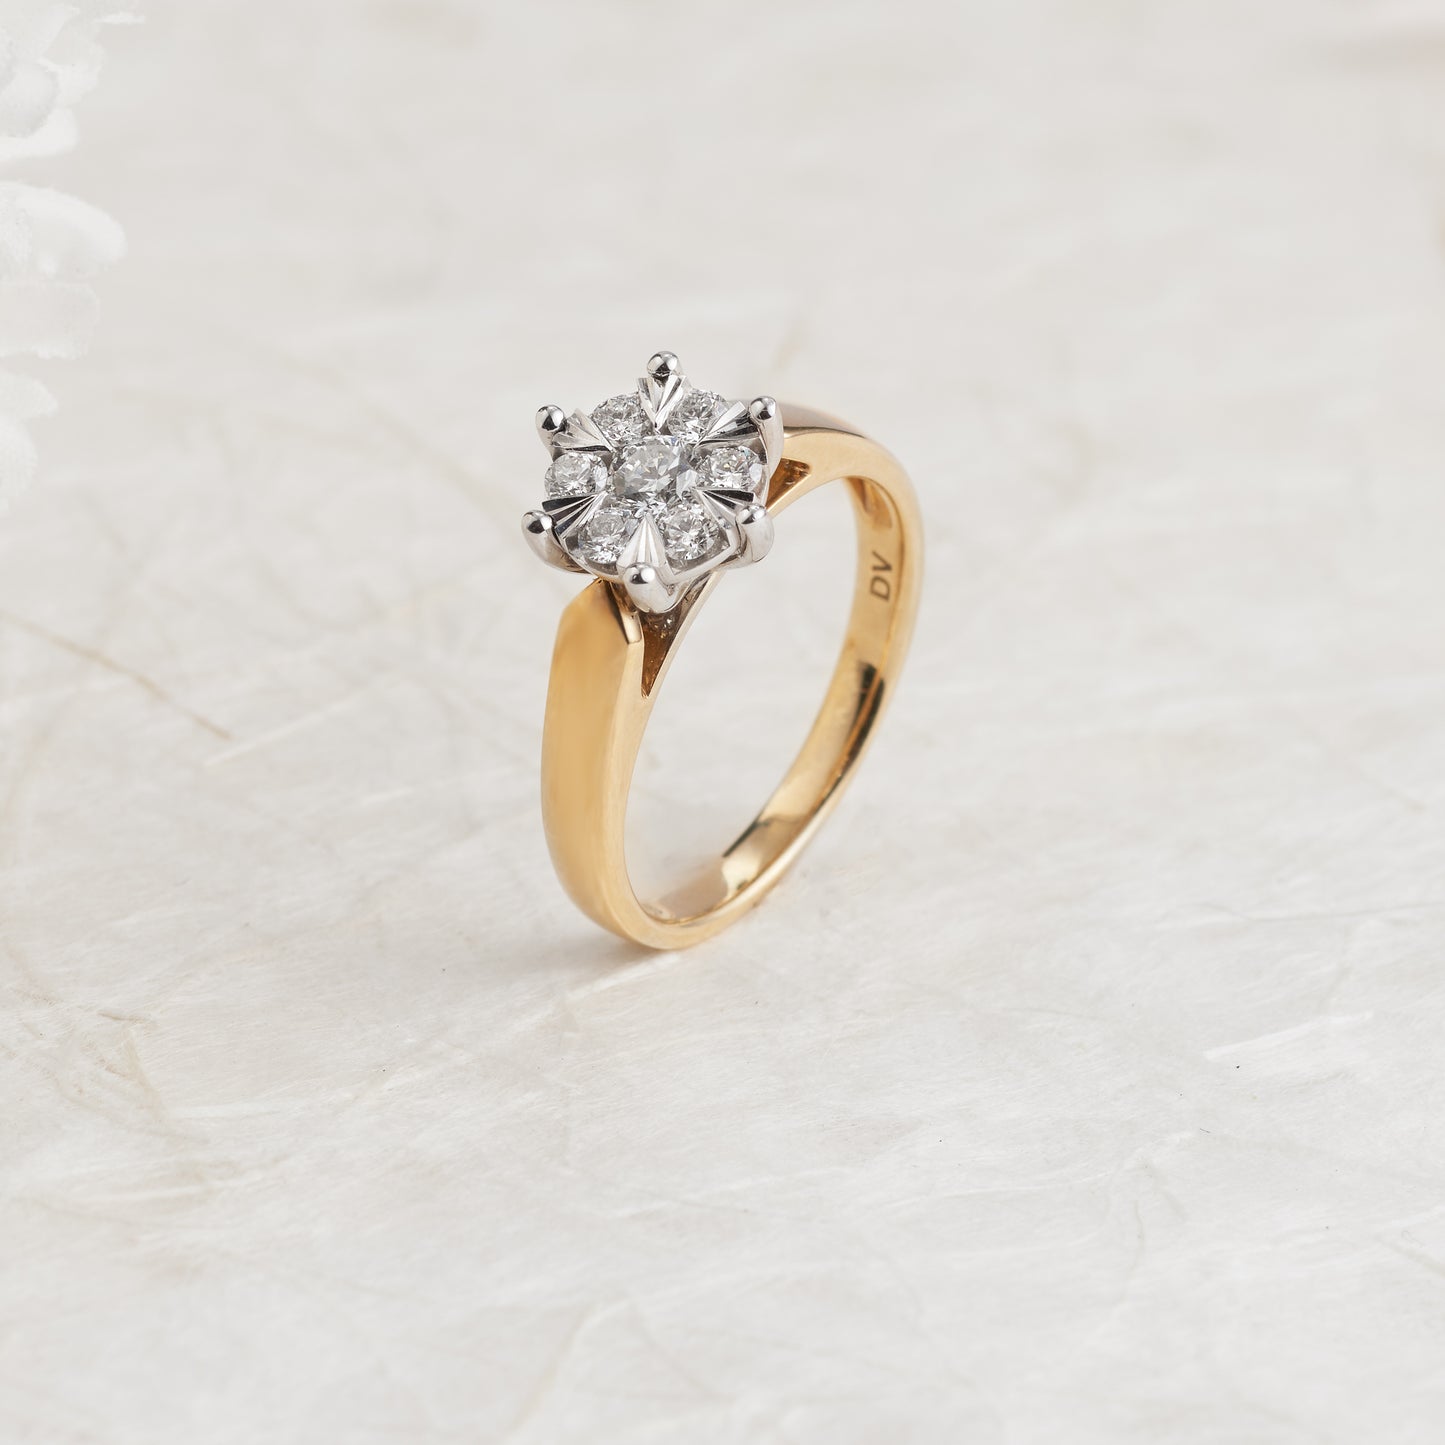 9K Yellow and White Gold Diamond Cluster Engagement Ring 0.5tdw